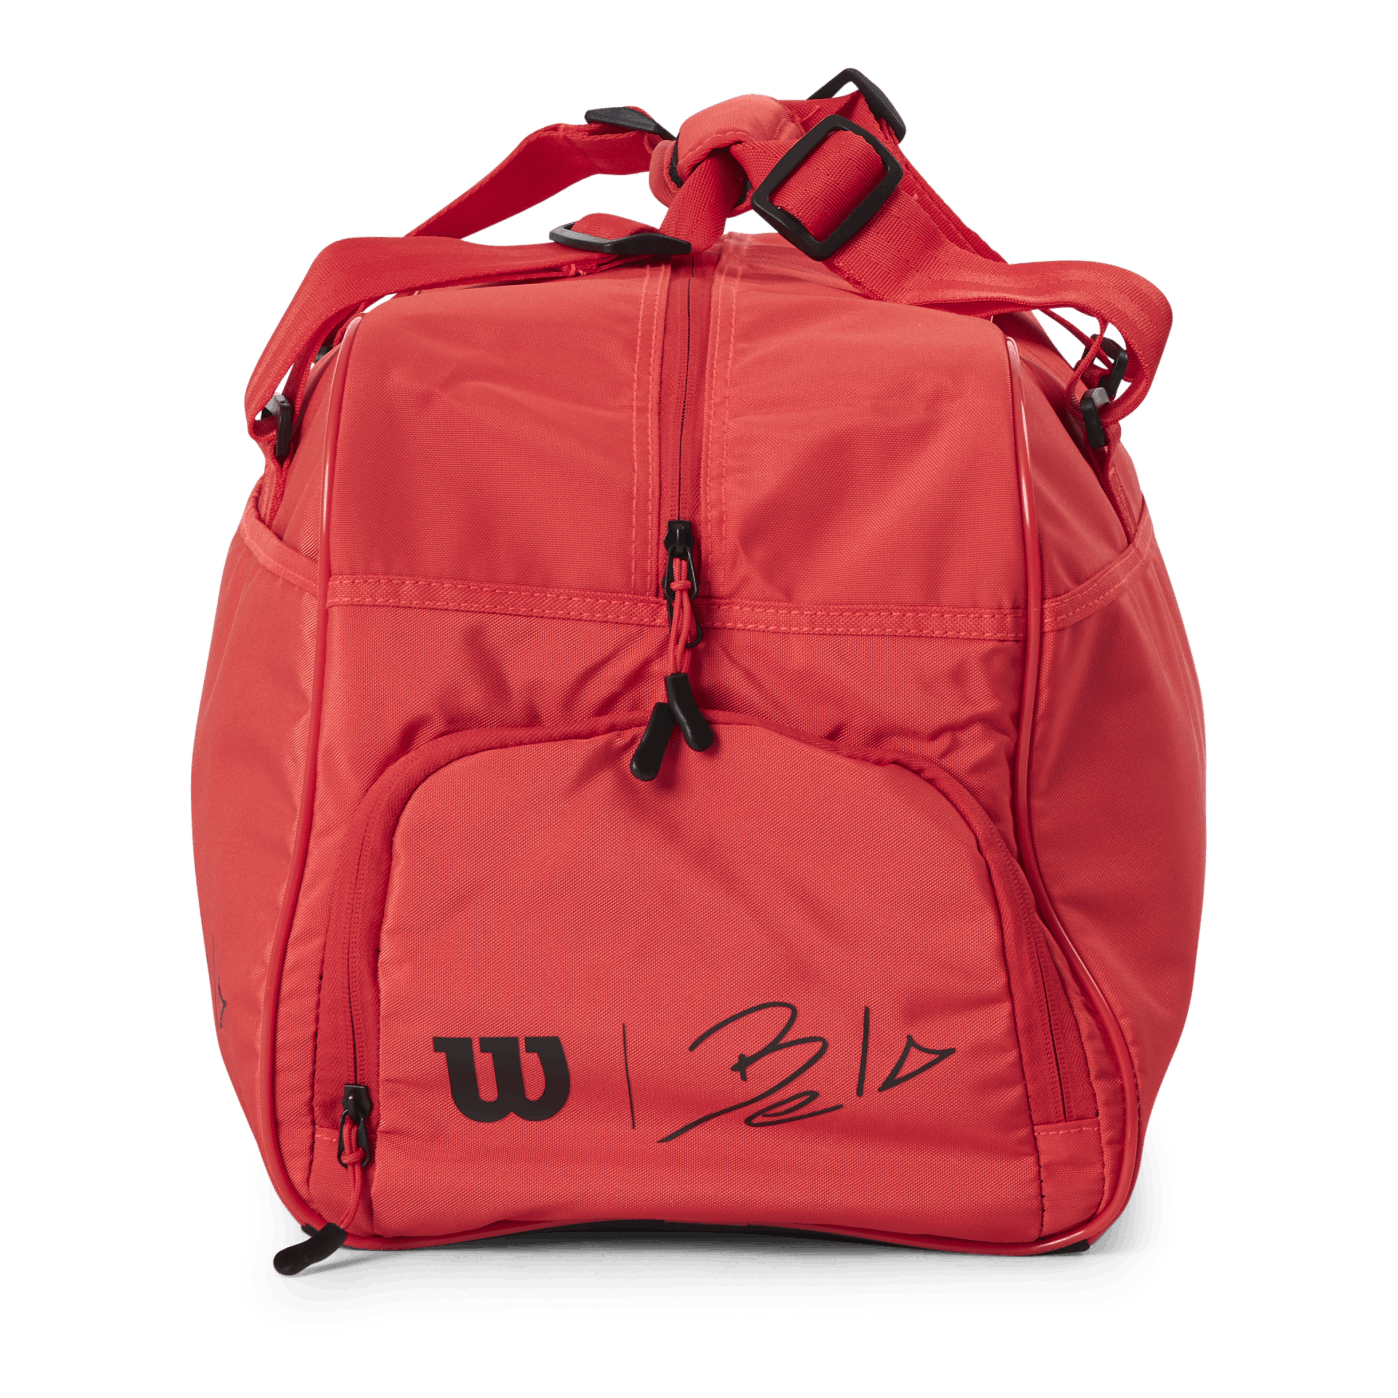 Bela Small Duffle Red